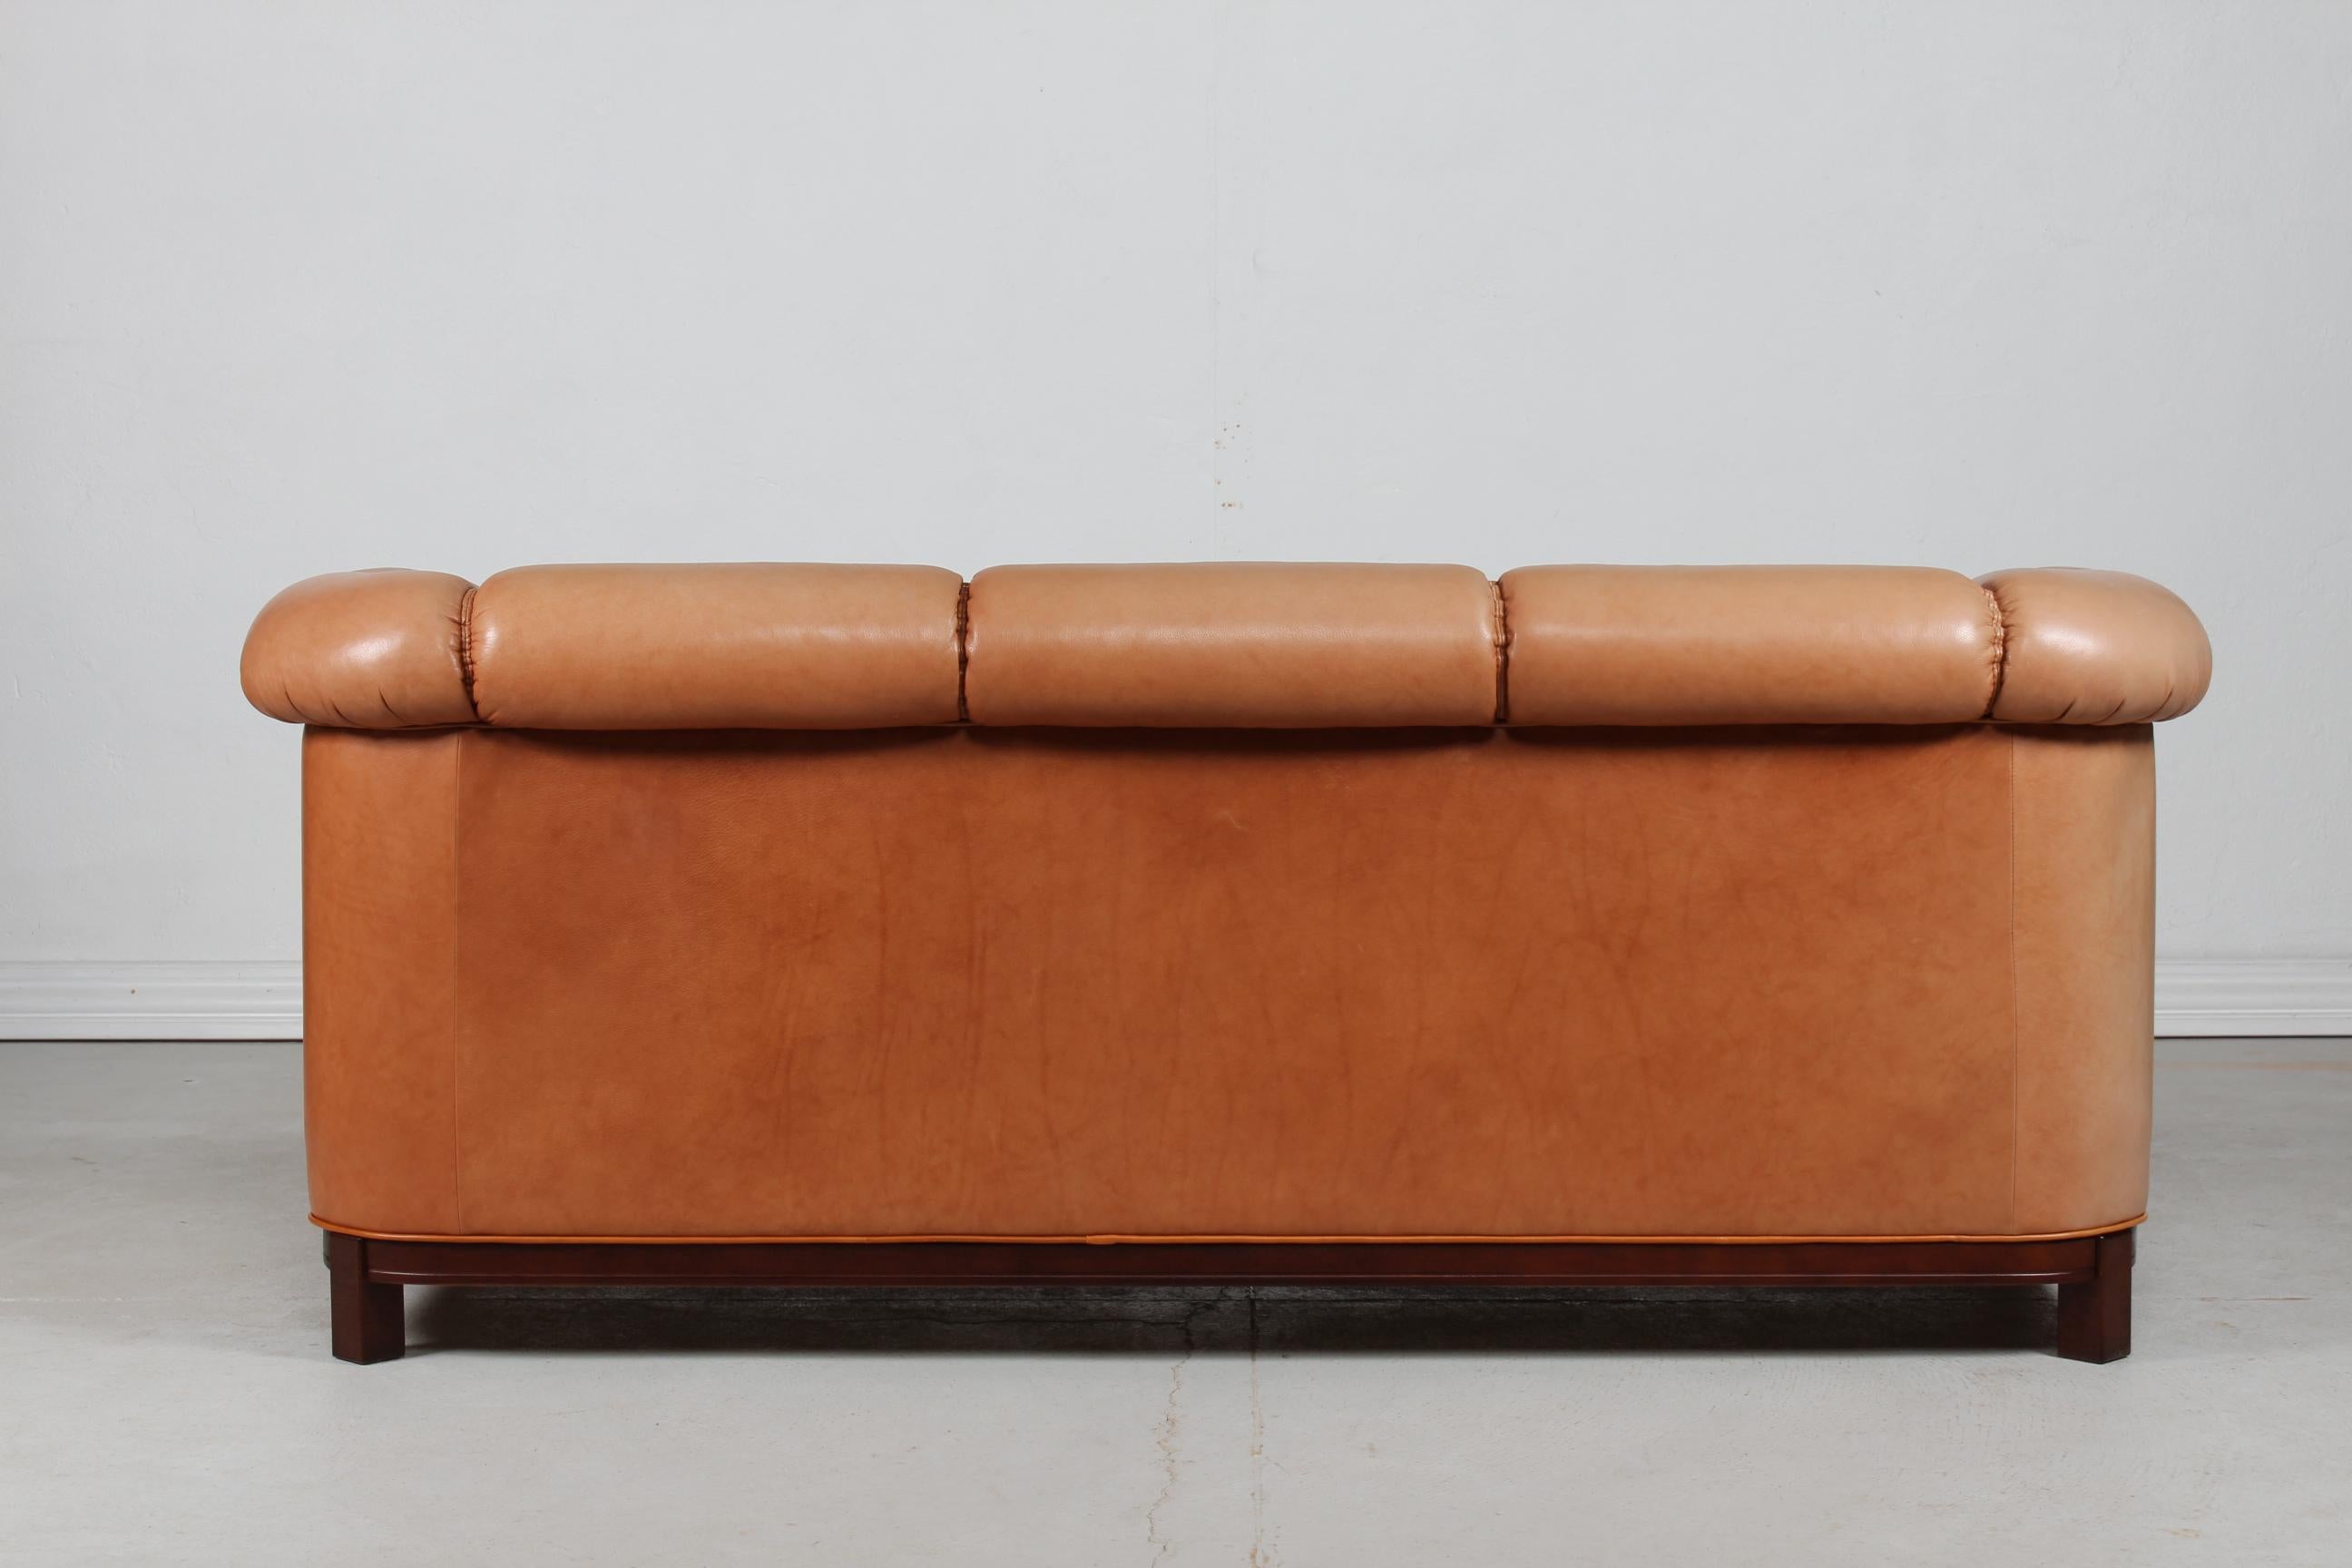 Vintage Chesterfield Sofa and Couch Cognac Leather and Mahogany Frame, 1970s For Sale 3